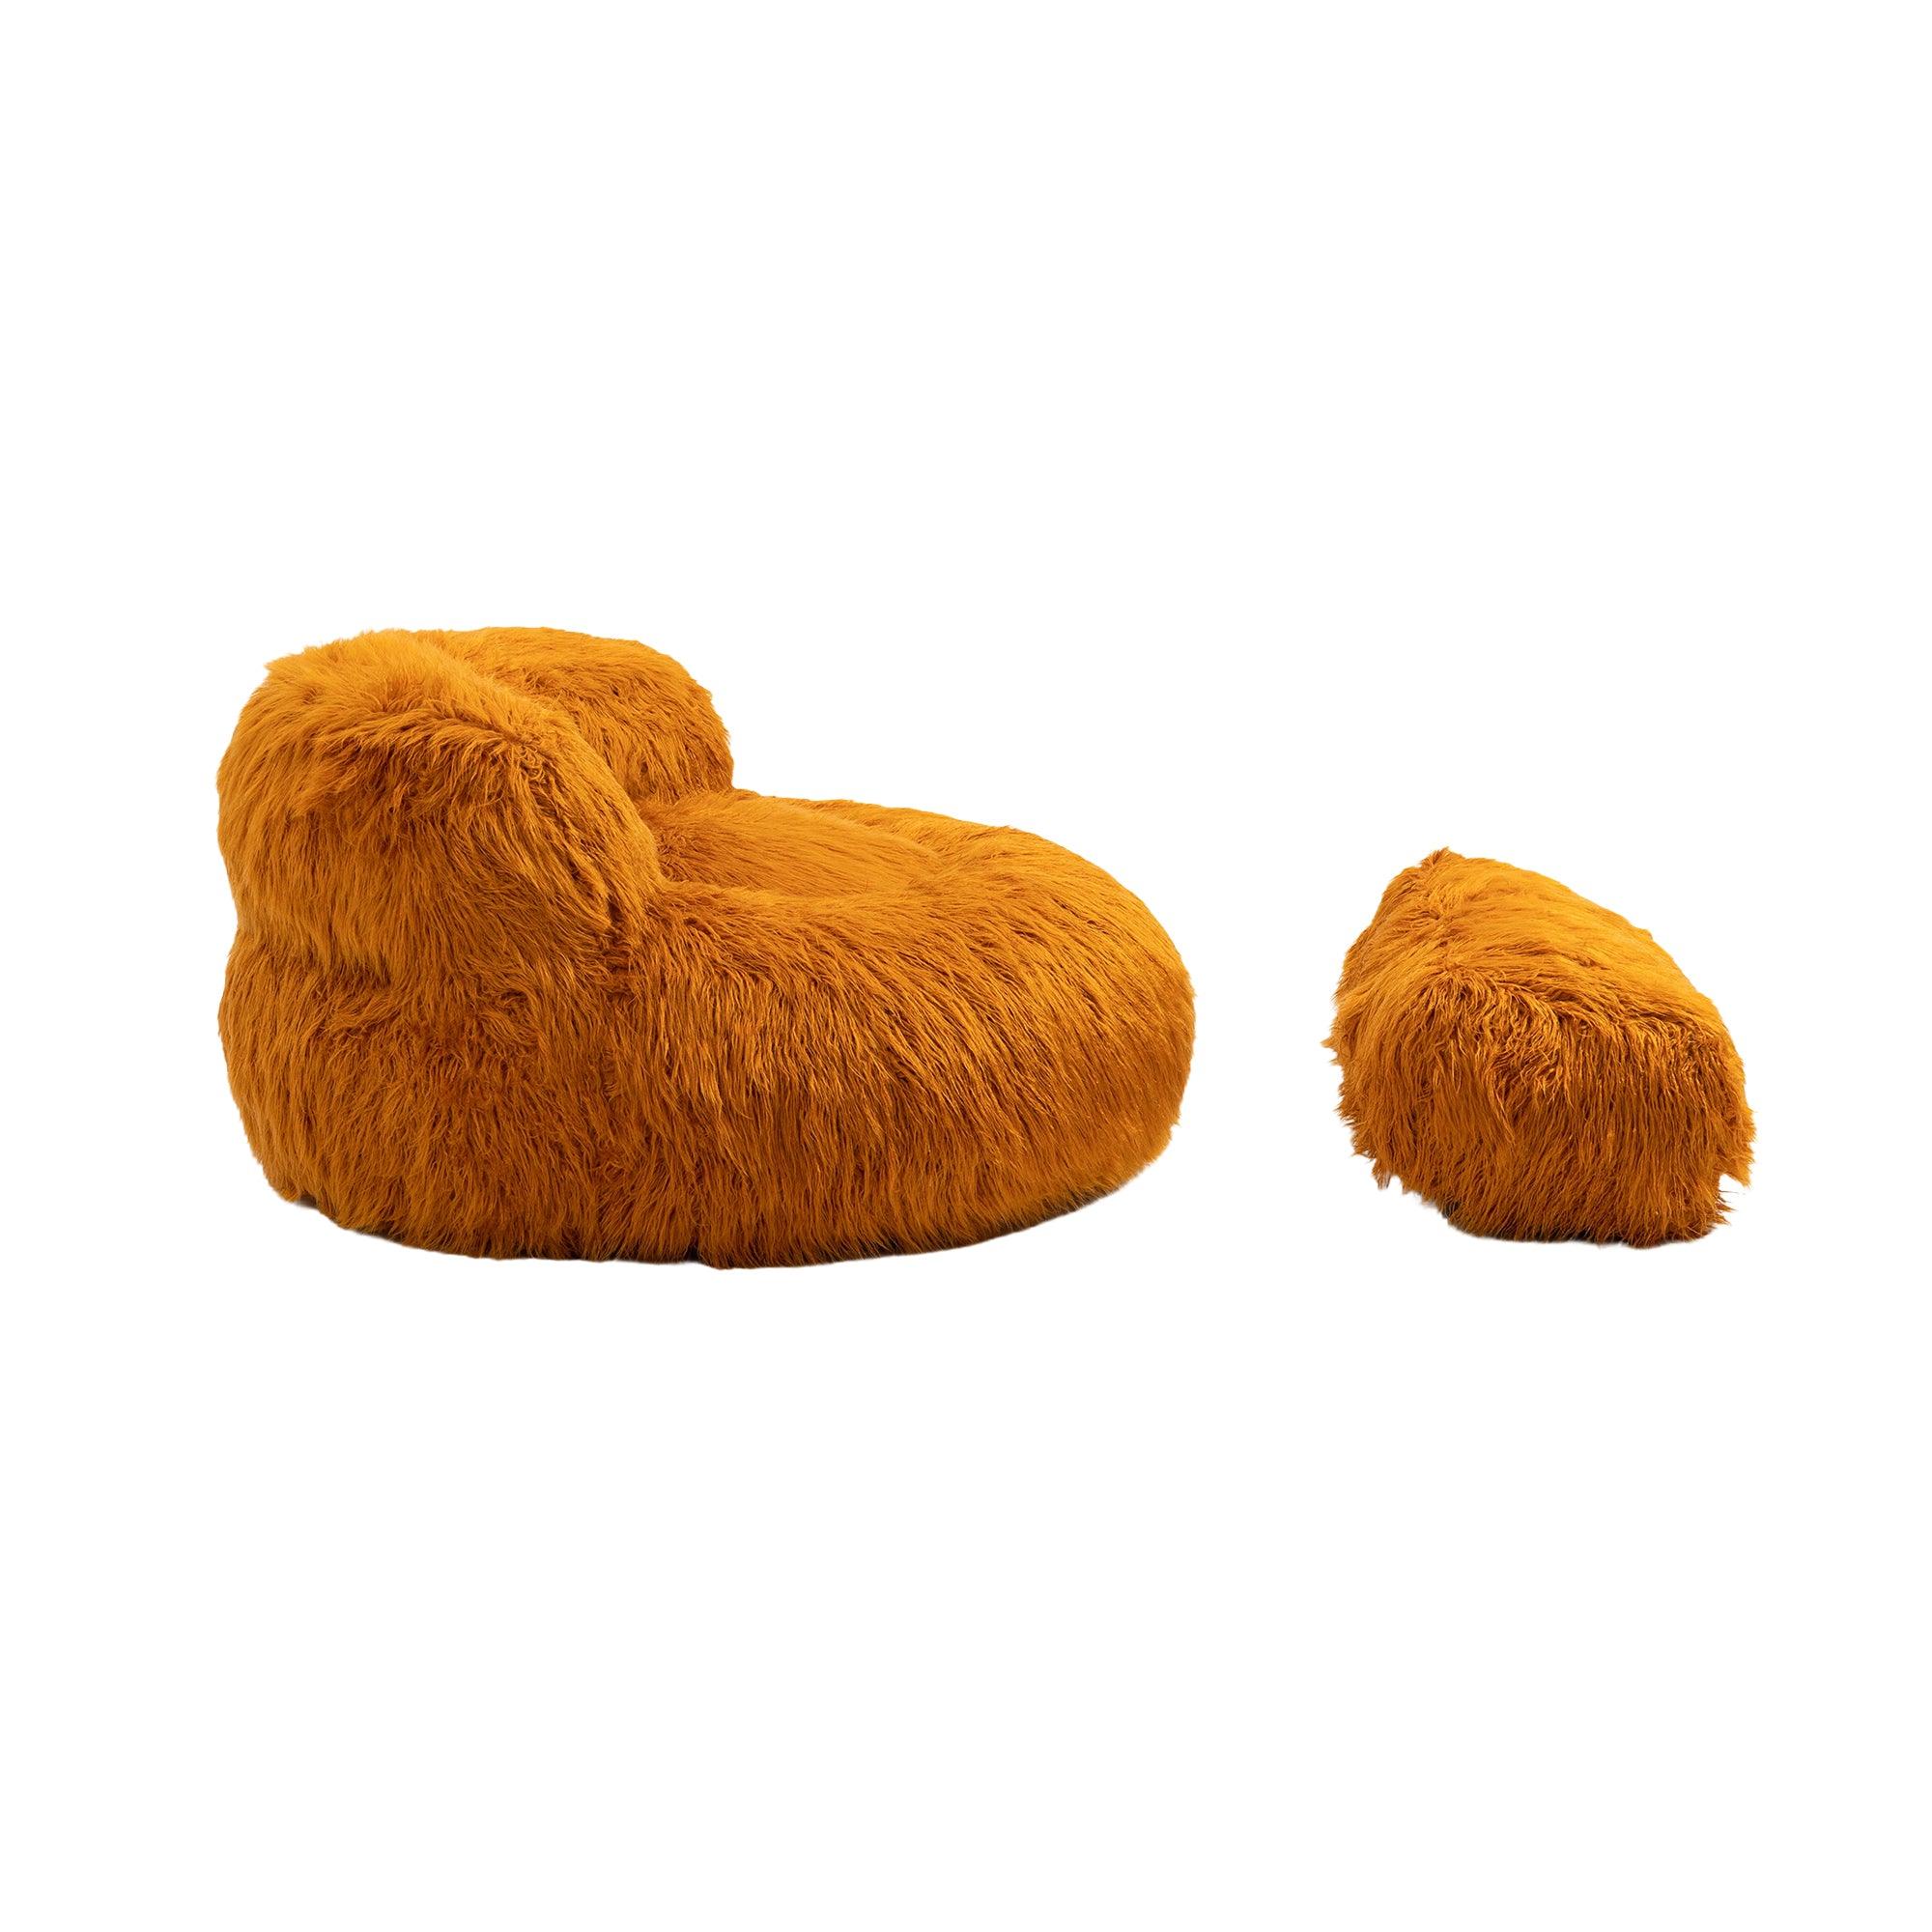 Gramanda 2-In-1 Bean Bag Chair Faux Fur Lazy Sofa & Ottoman Footstool For Adults And Kids - Orange